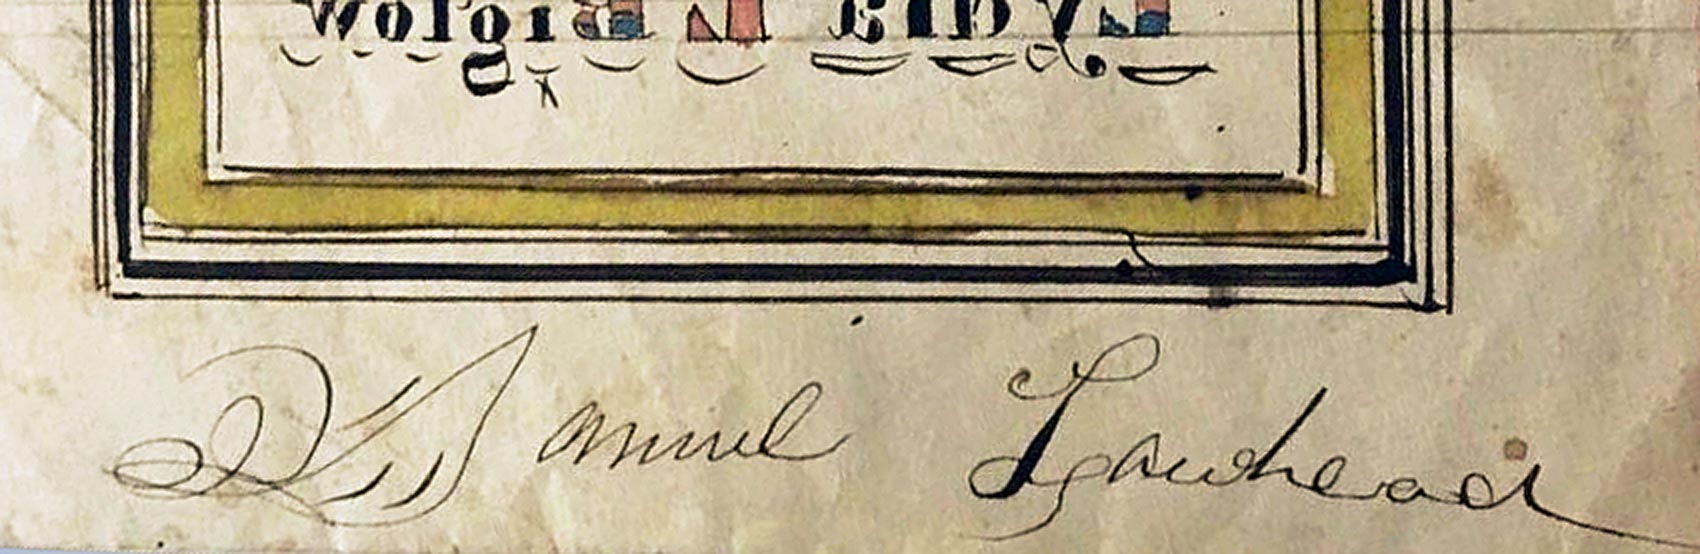 Detail of Bigelow Marriage Record showing “Samuel Lawhead” signature from reverse side